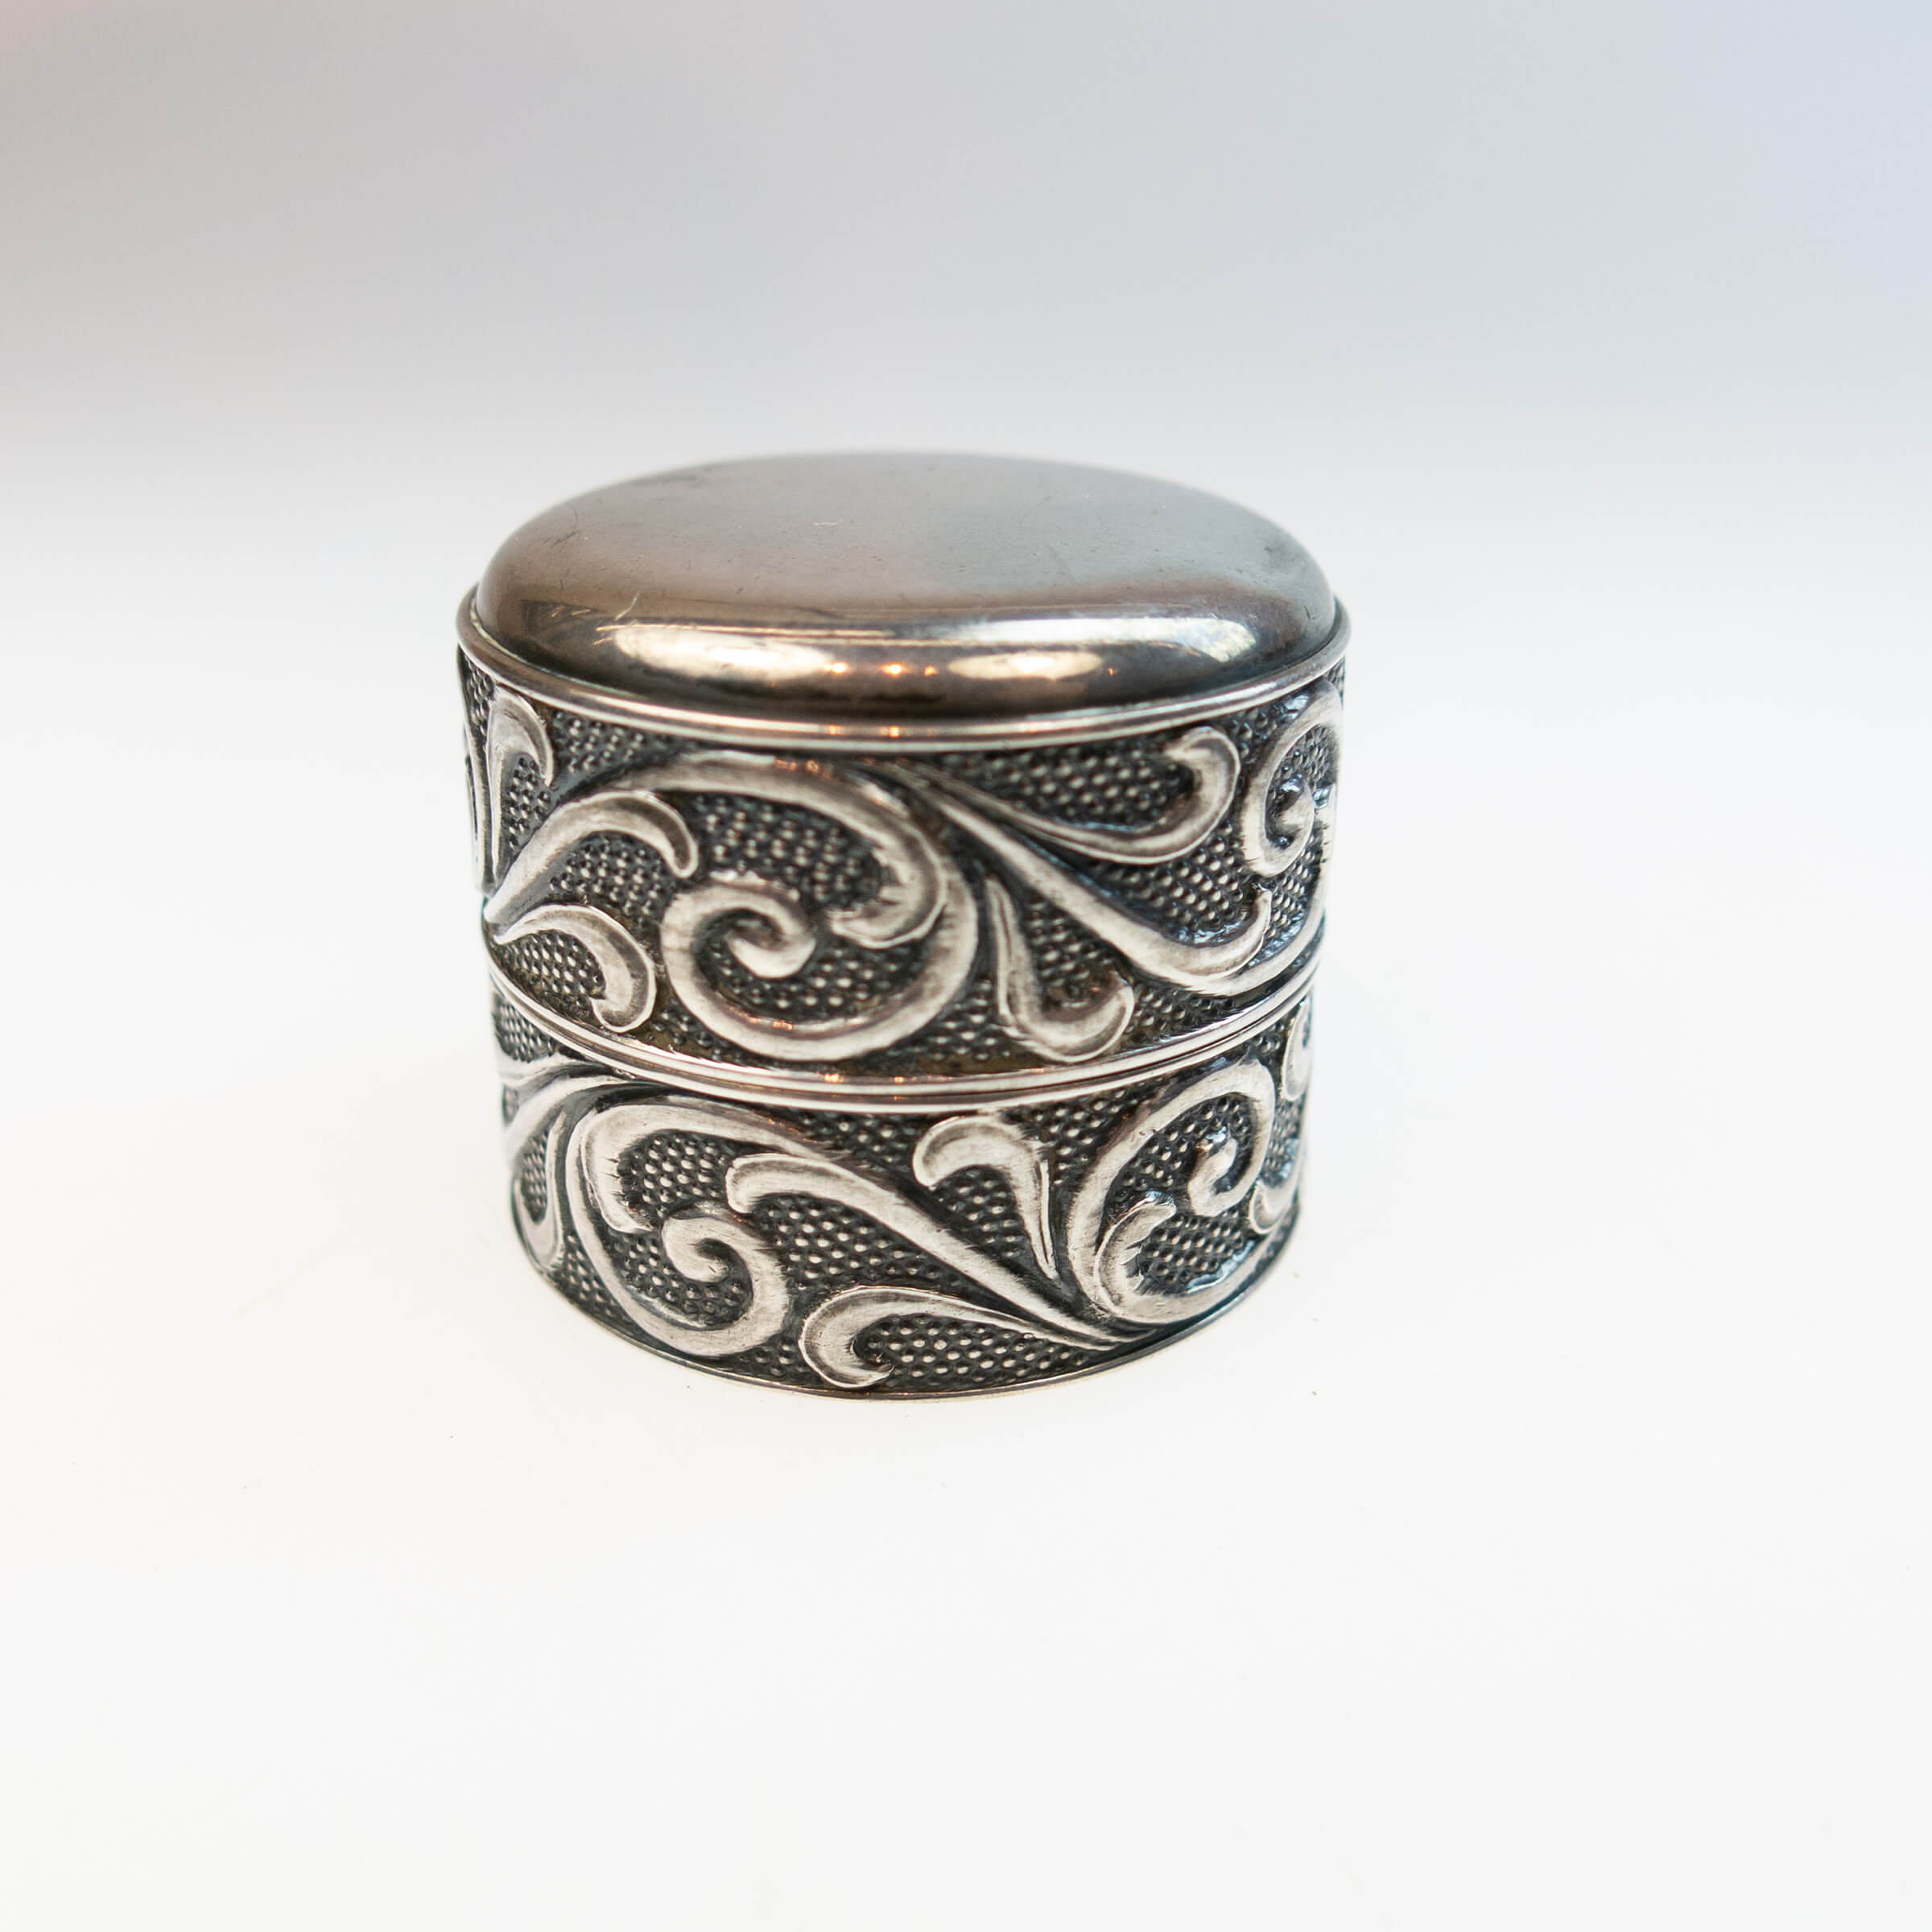 Howard & Co., Fifth Avenue, New York Sterling Silver Ring Box